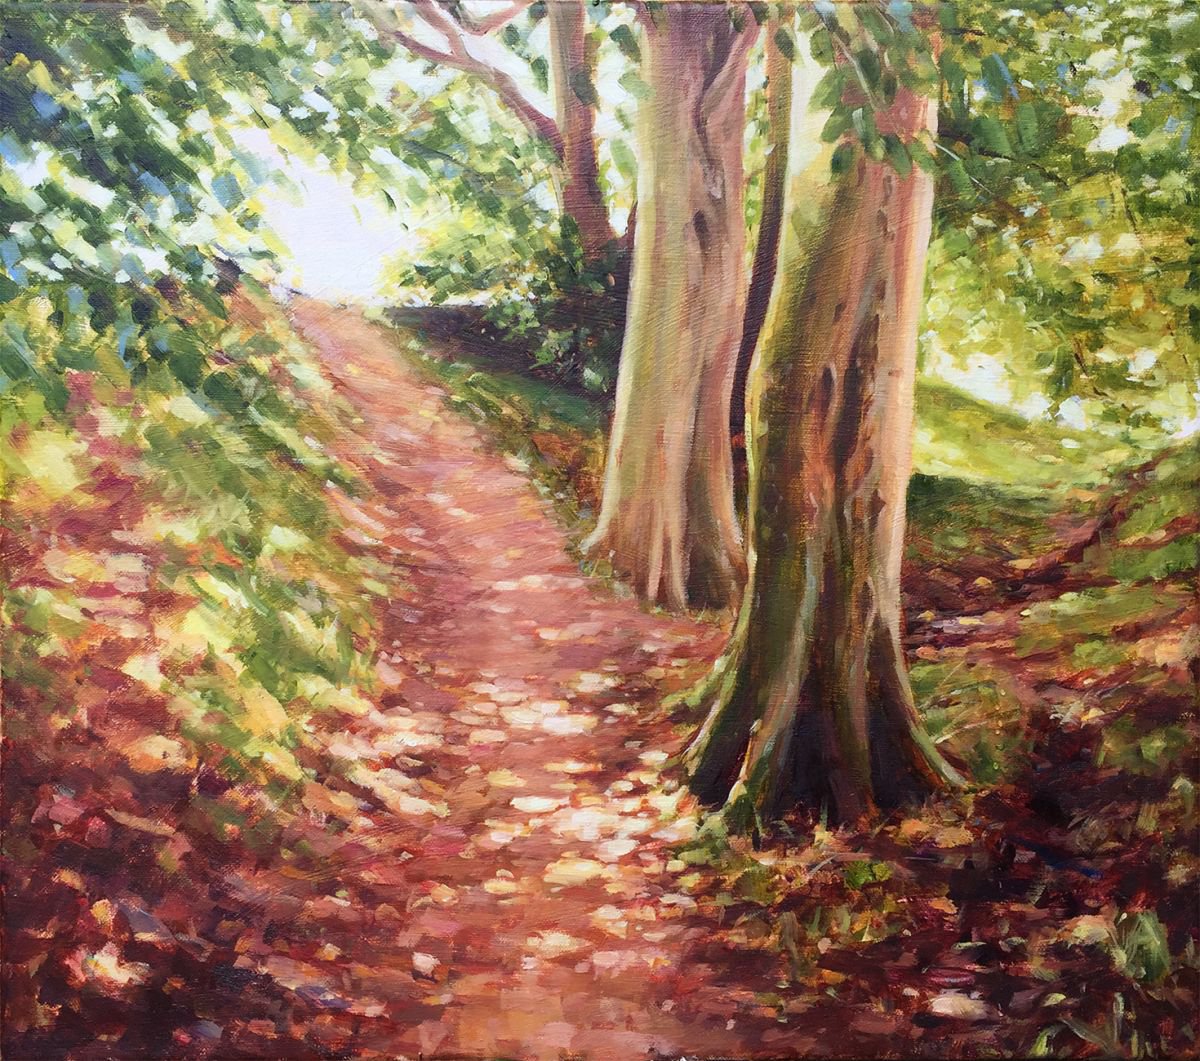 Summer Light In The Woods by Jana Forsyth